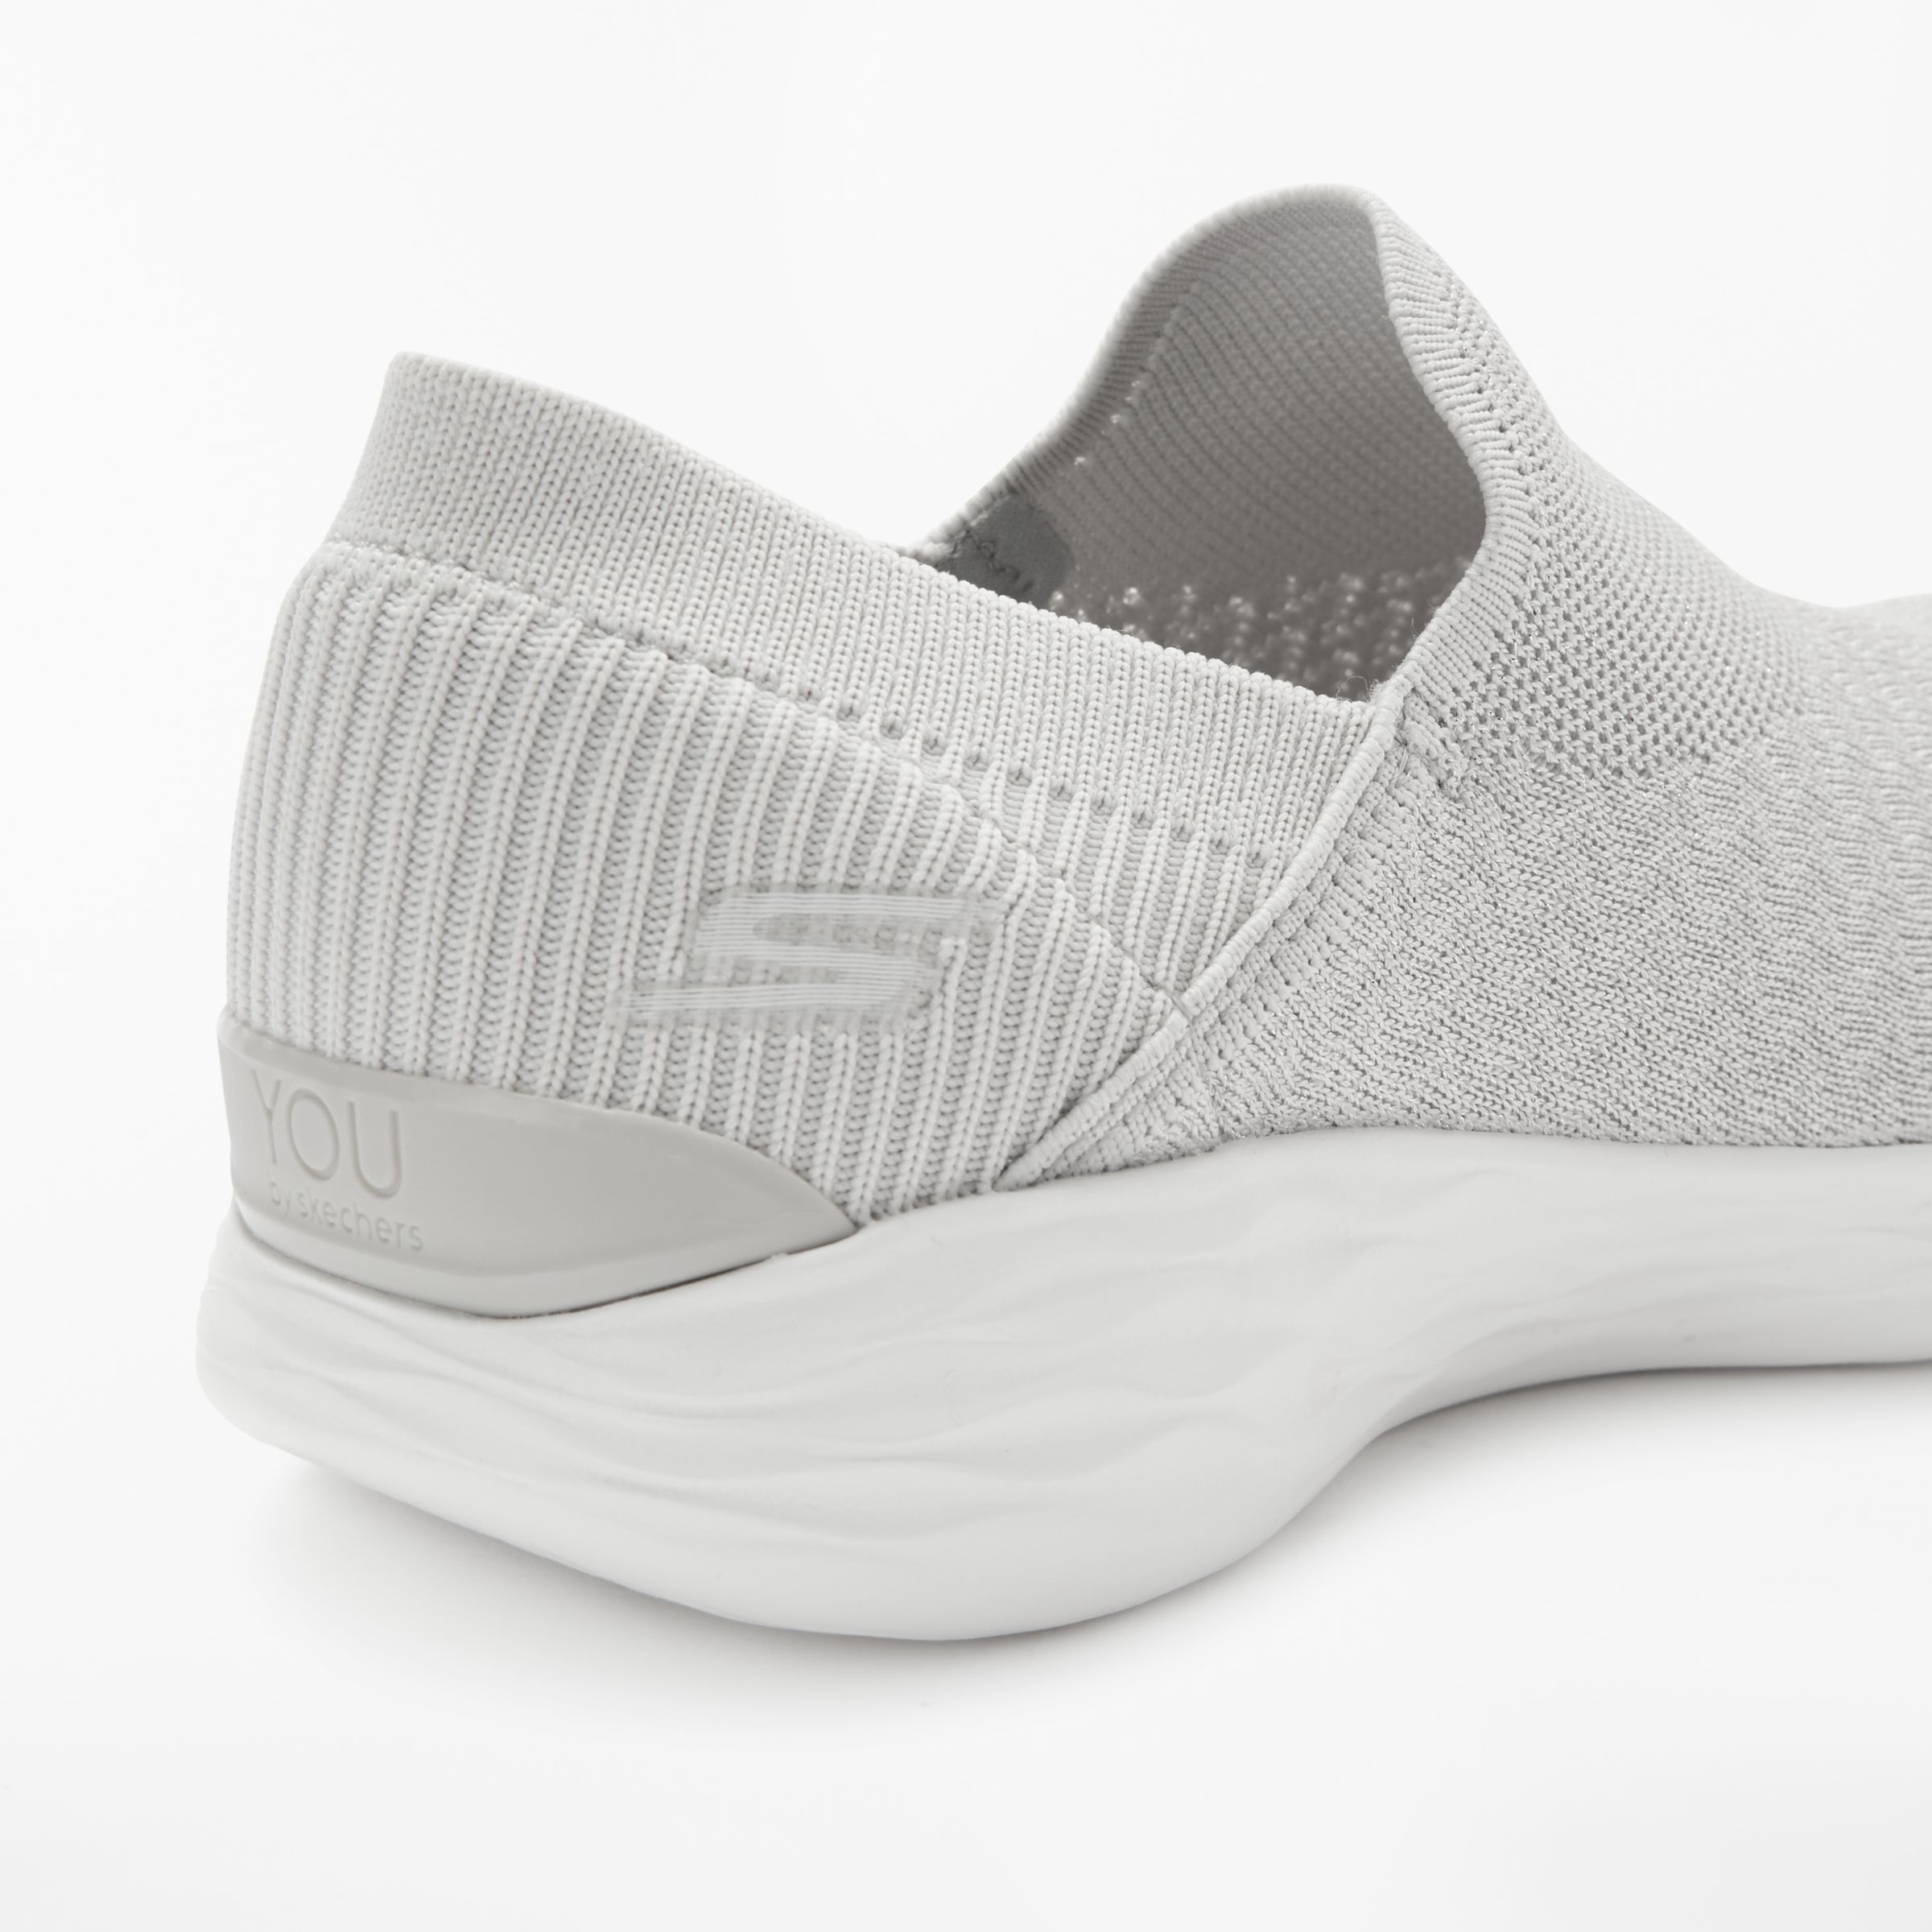 Skechers You Transcend Slip-On Trainers 